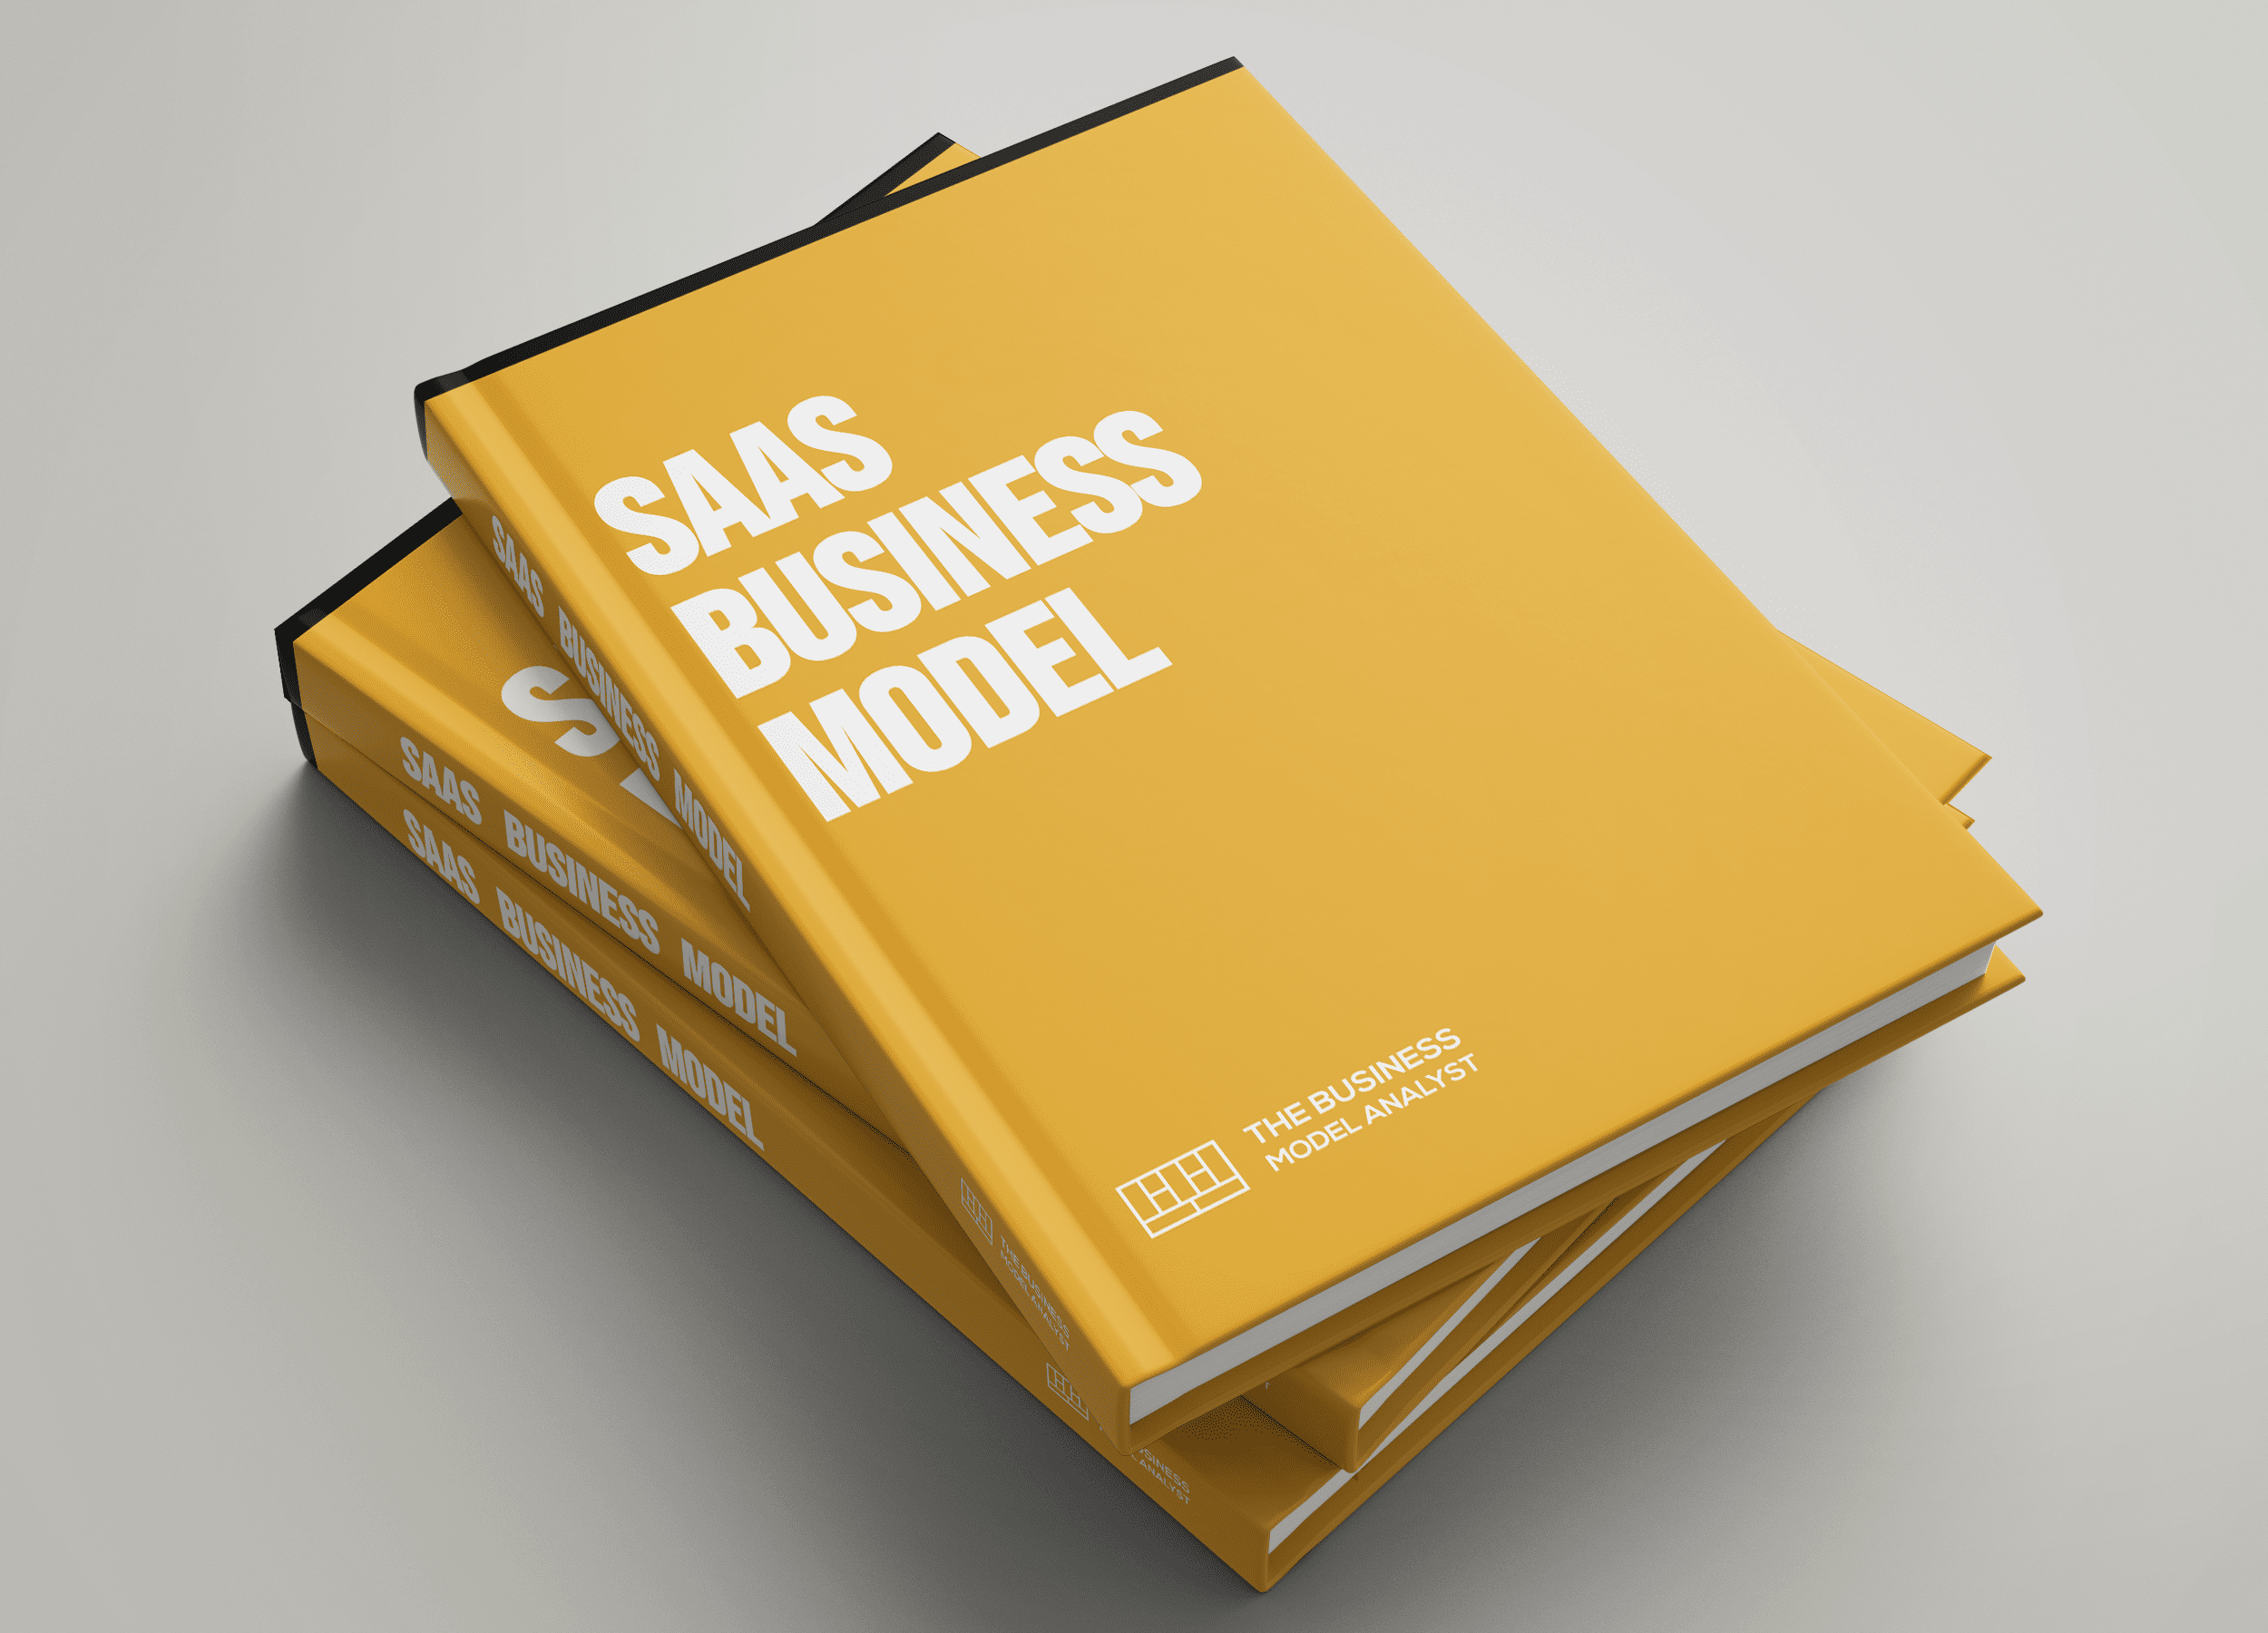 SaaS Business Model Covers